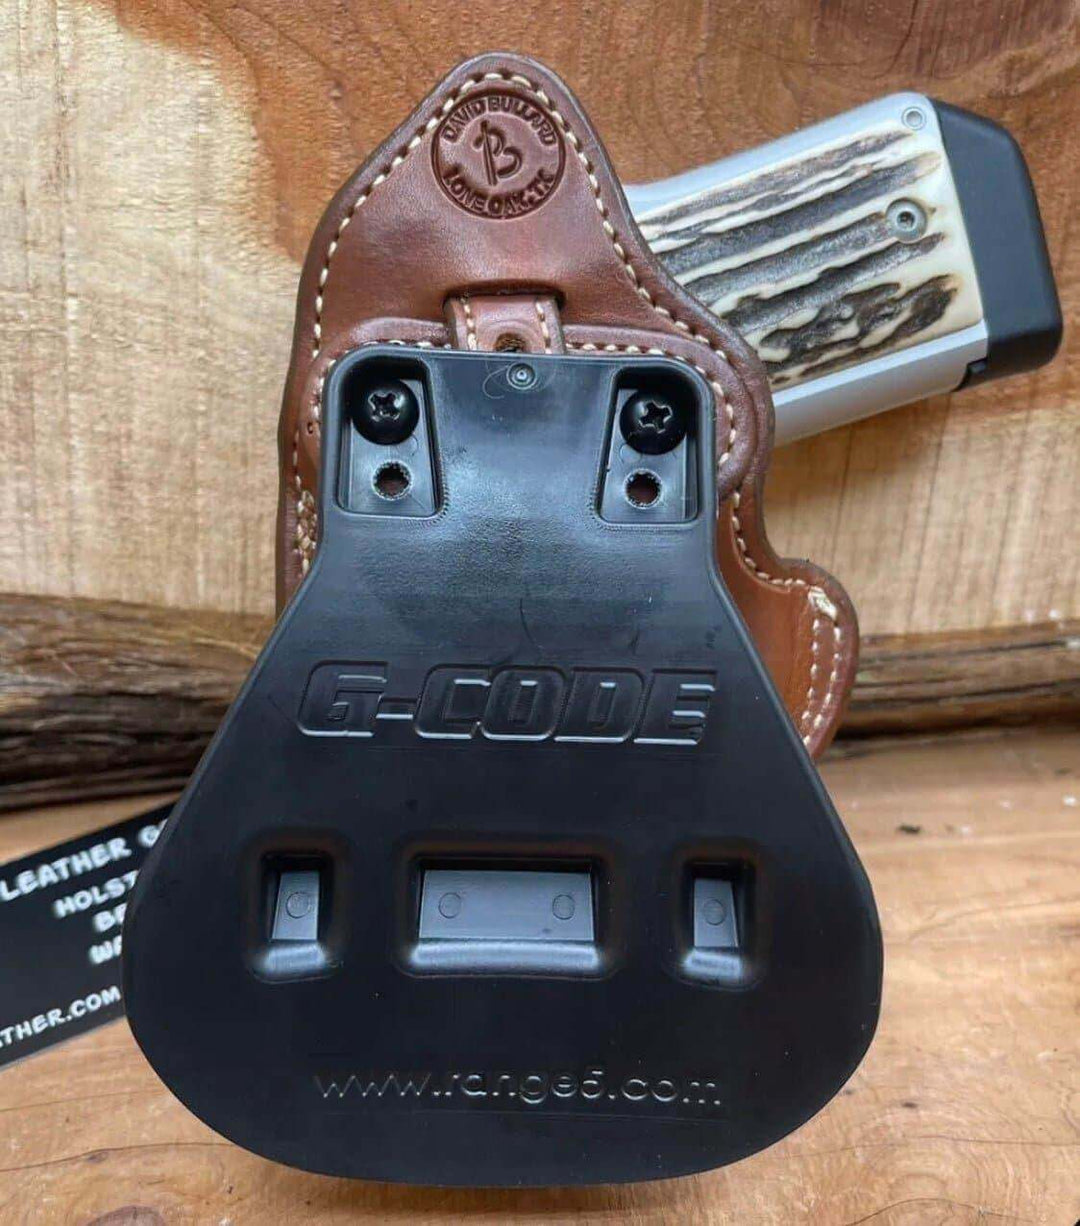 *Made to Order* LH/RH Paddle Rancher Holster Made For Your Gun-Busted B Leather